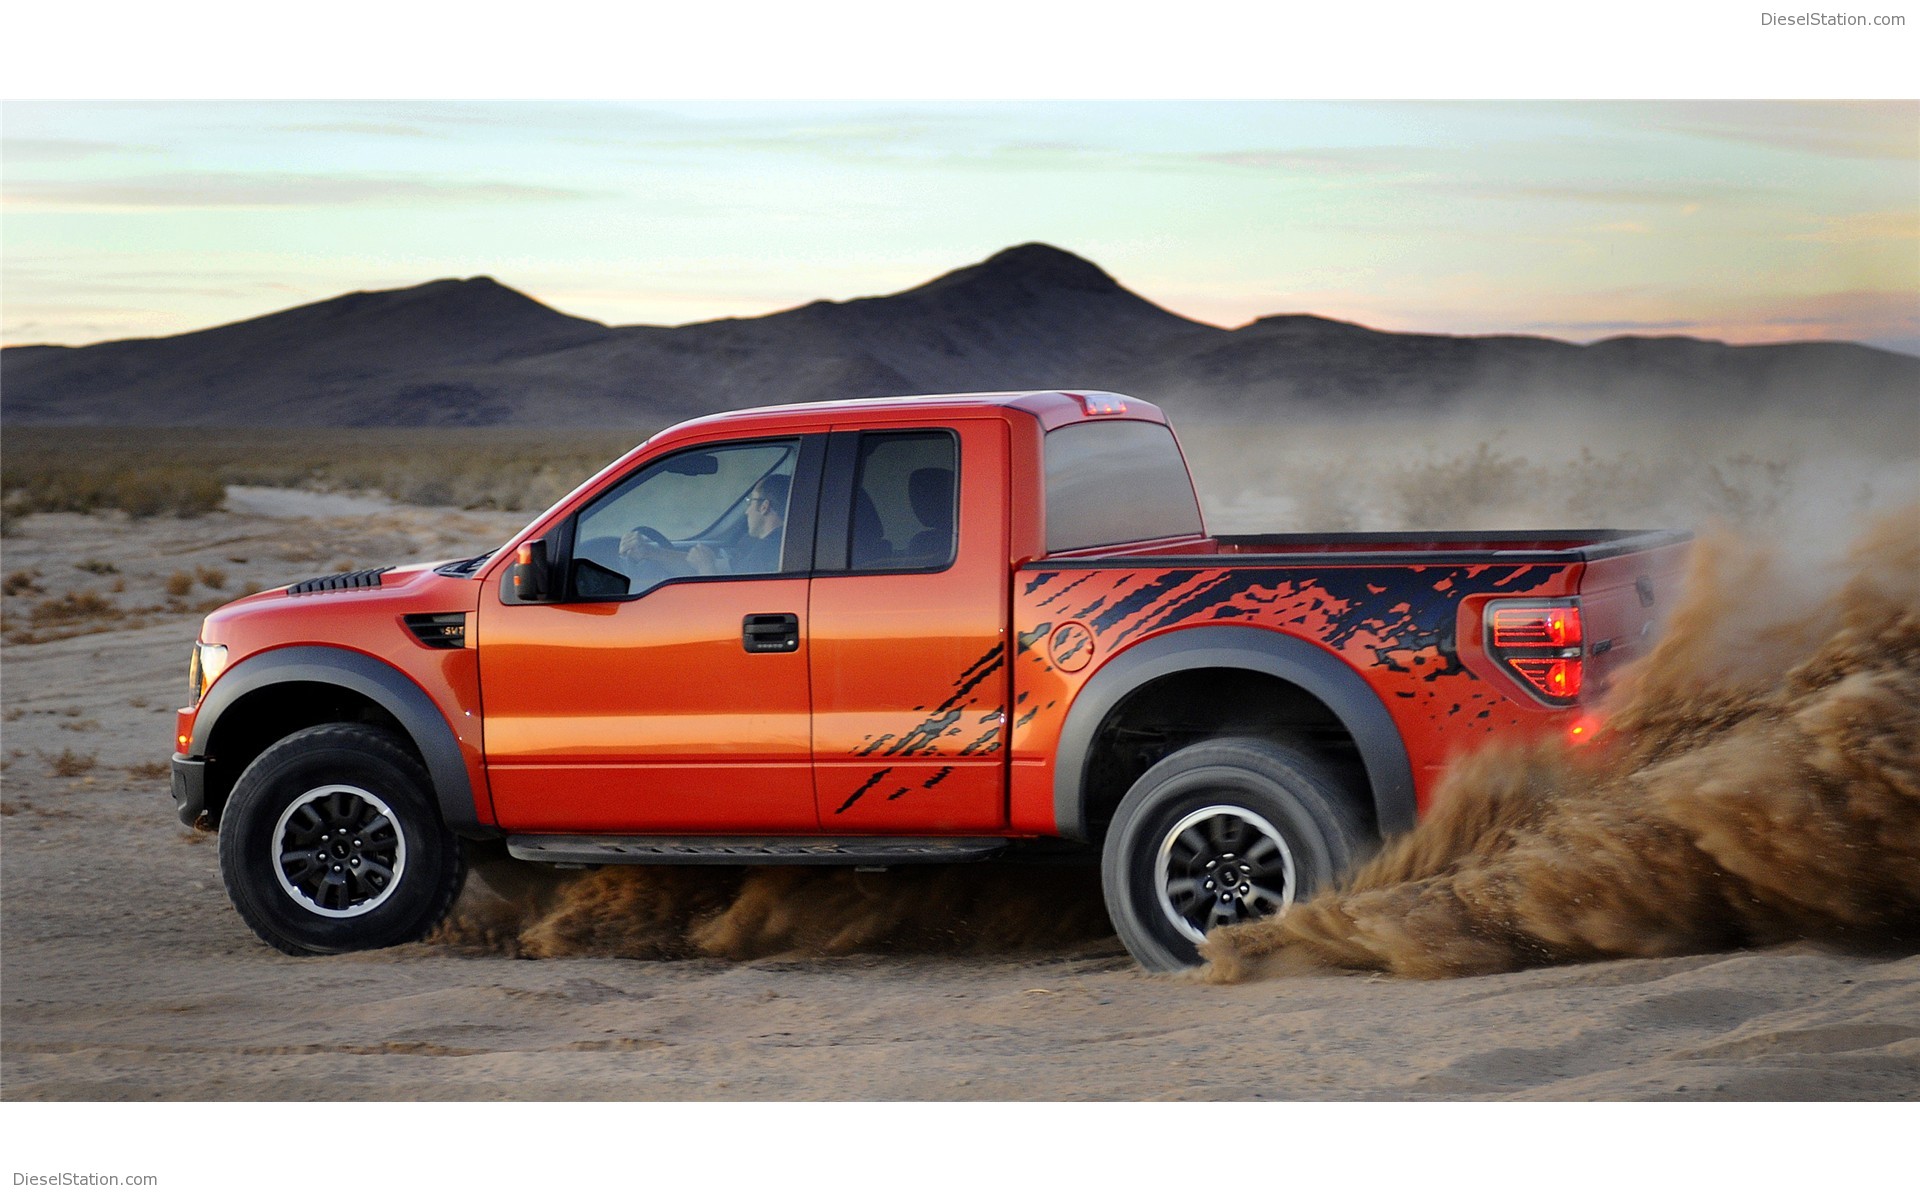 Ford F150 Svt Raptor Widescreen Exotic Car Wallpaper Of